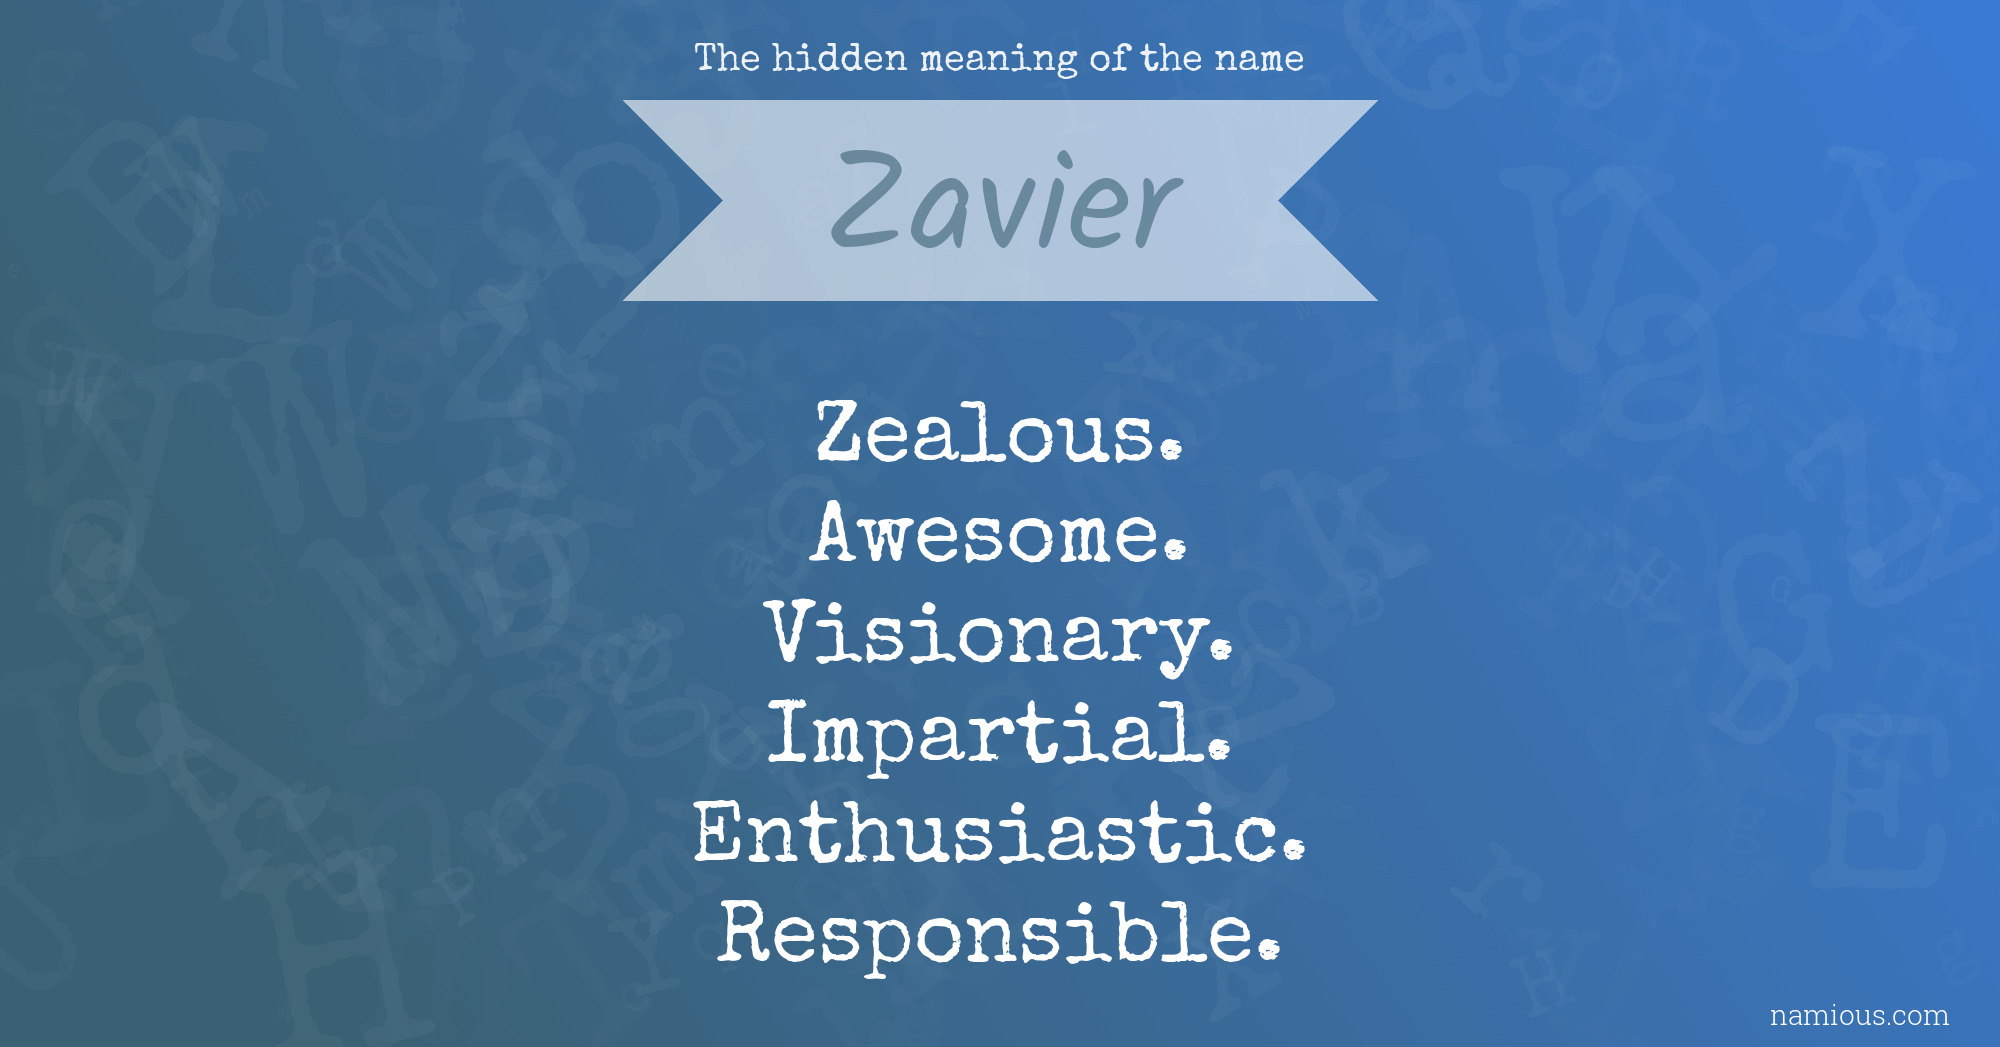 The hidden meaning of the name Zavier